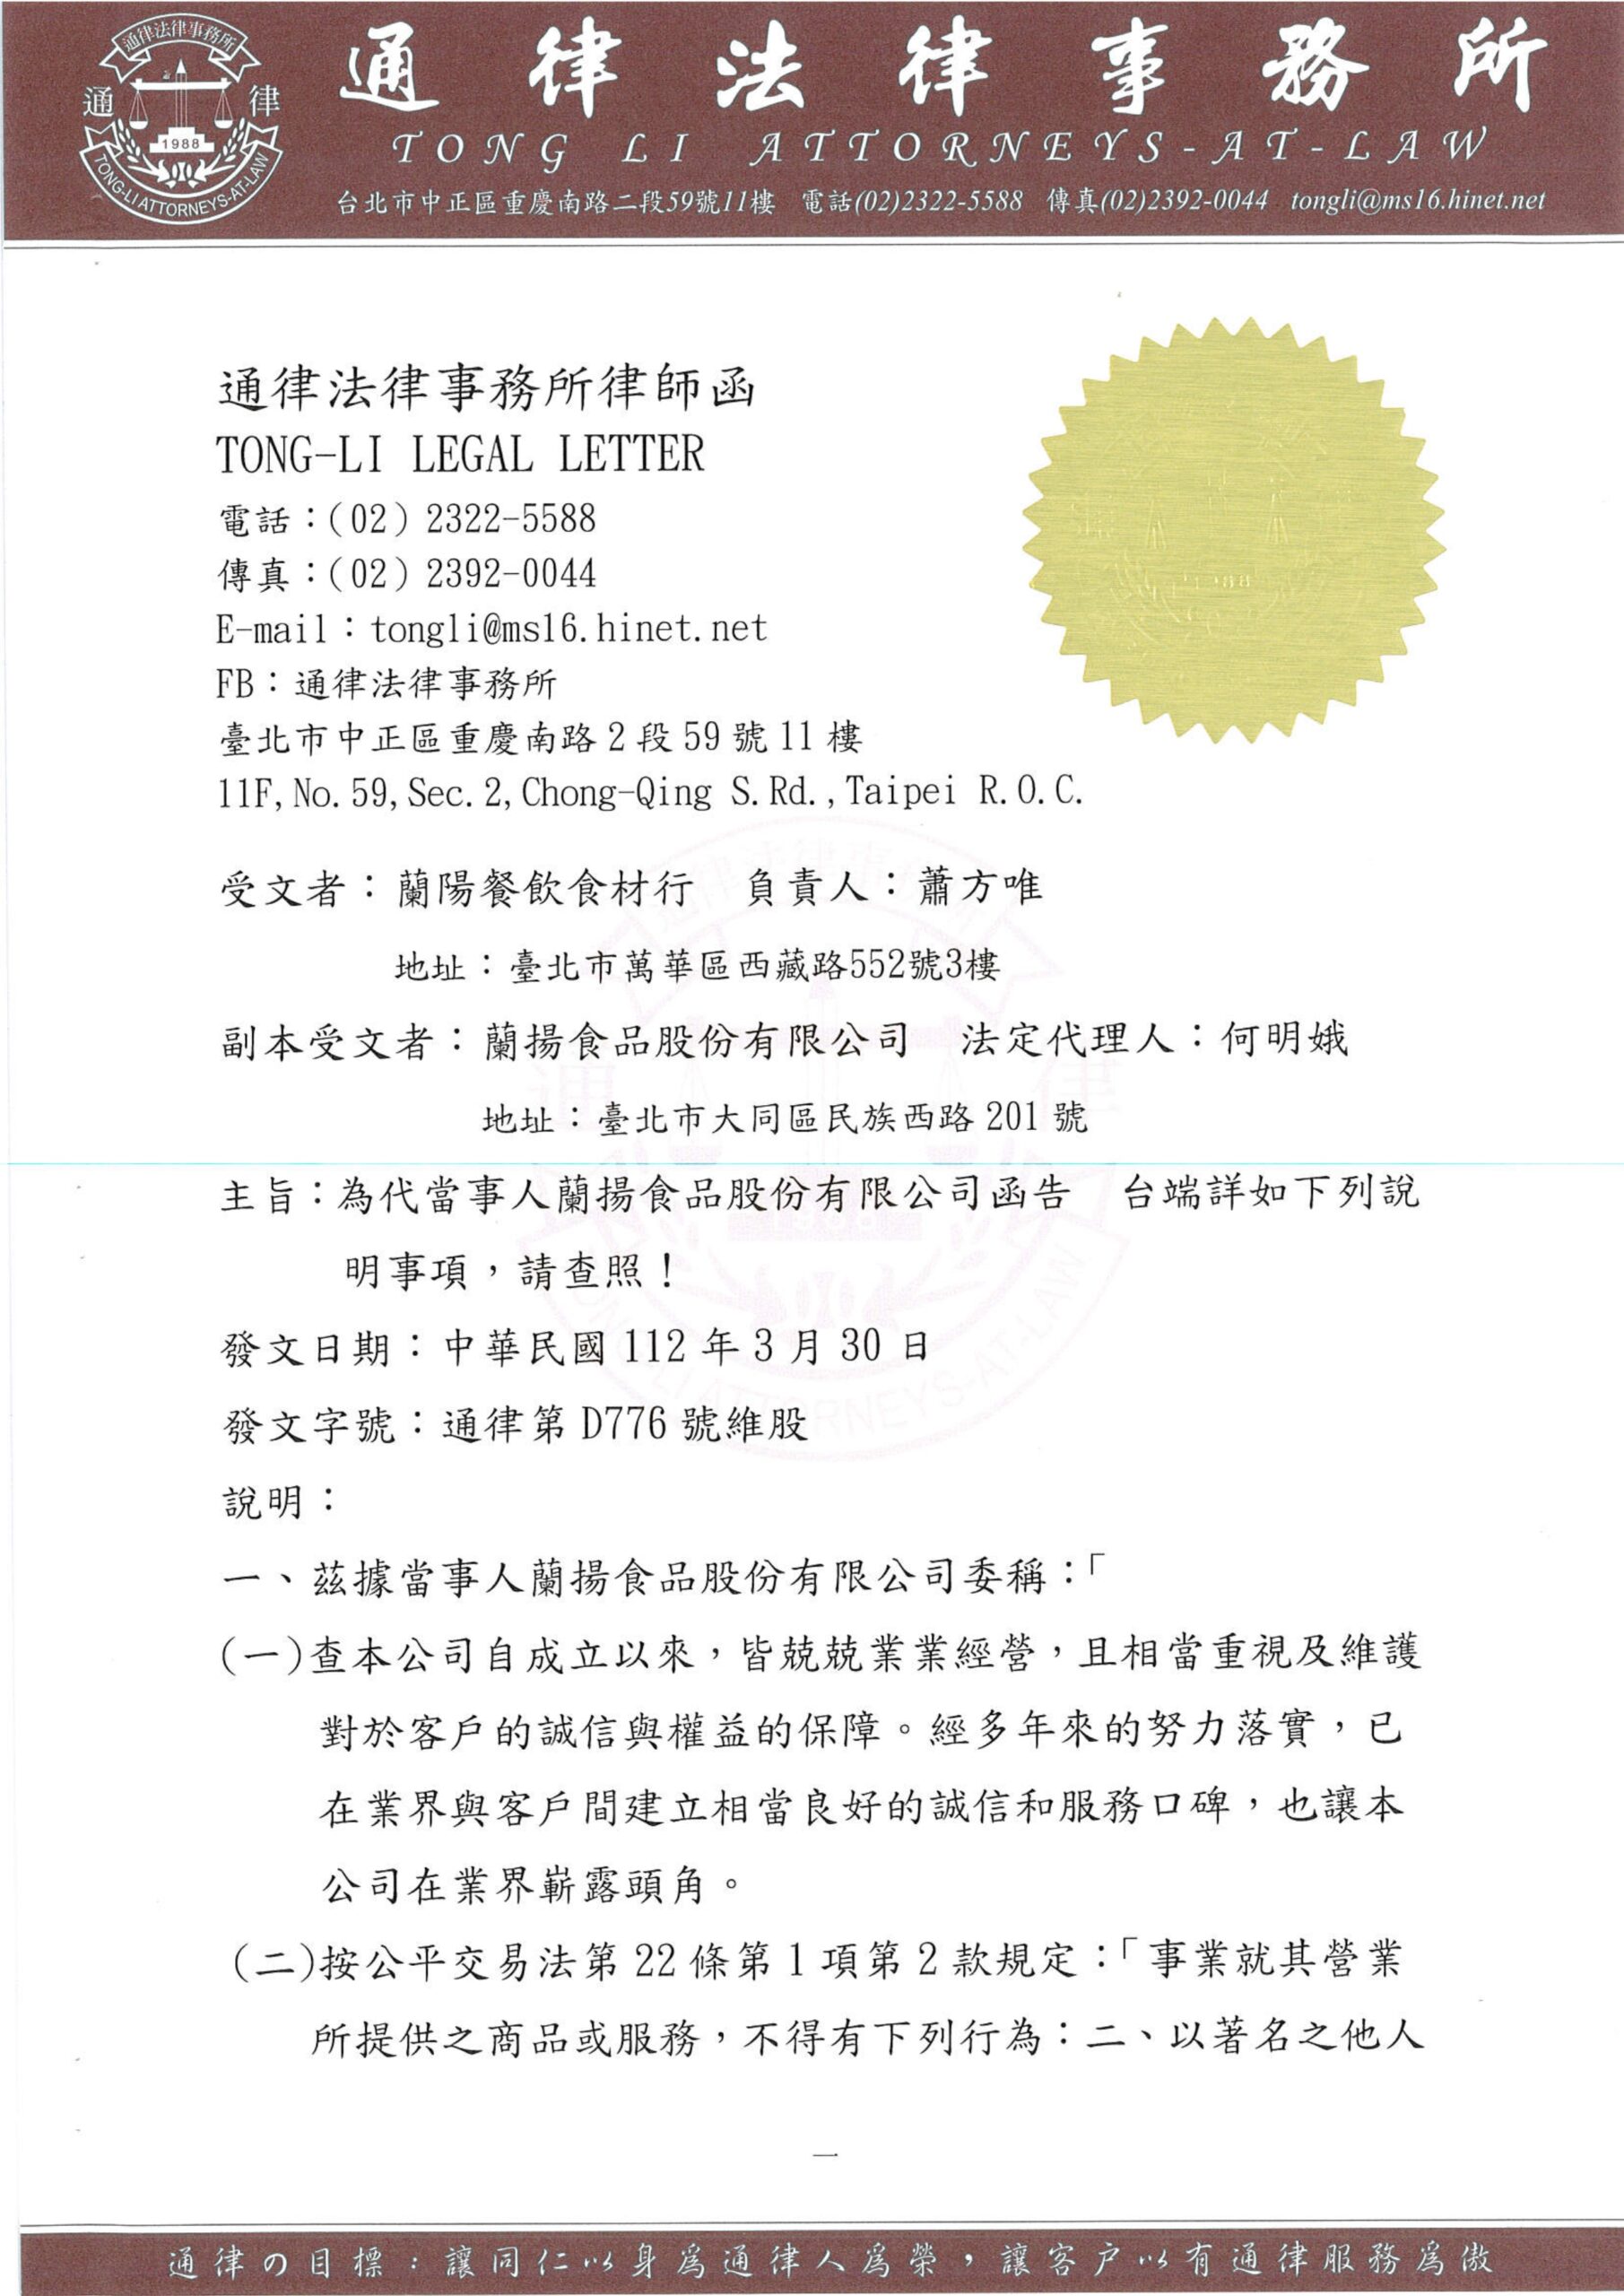 Lanyang Catering Materials Co., Ltd._Lawyer Letter 230331 영수증_페이지-0001